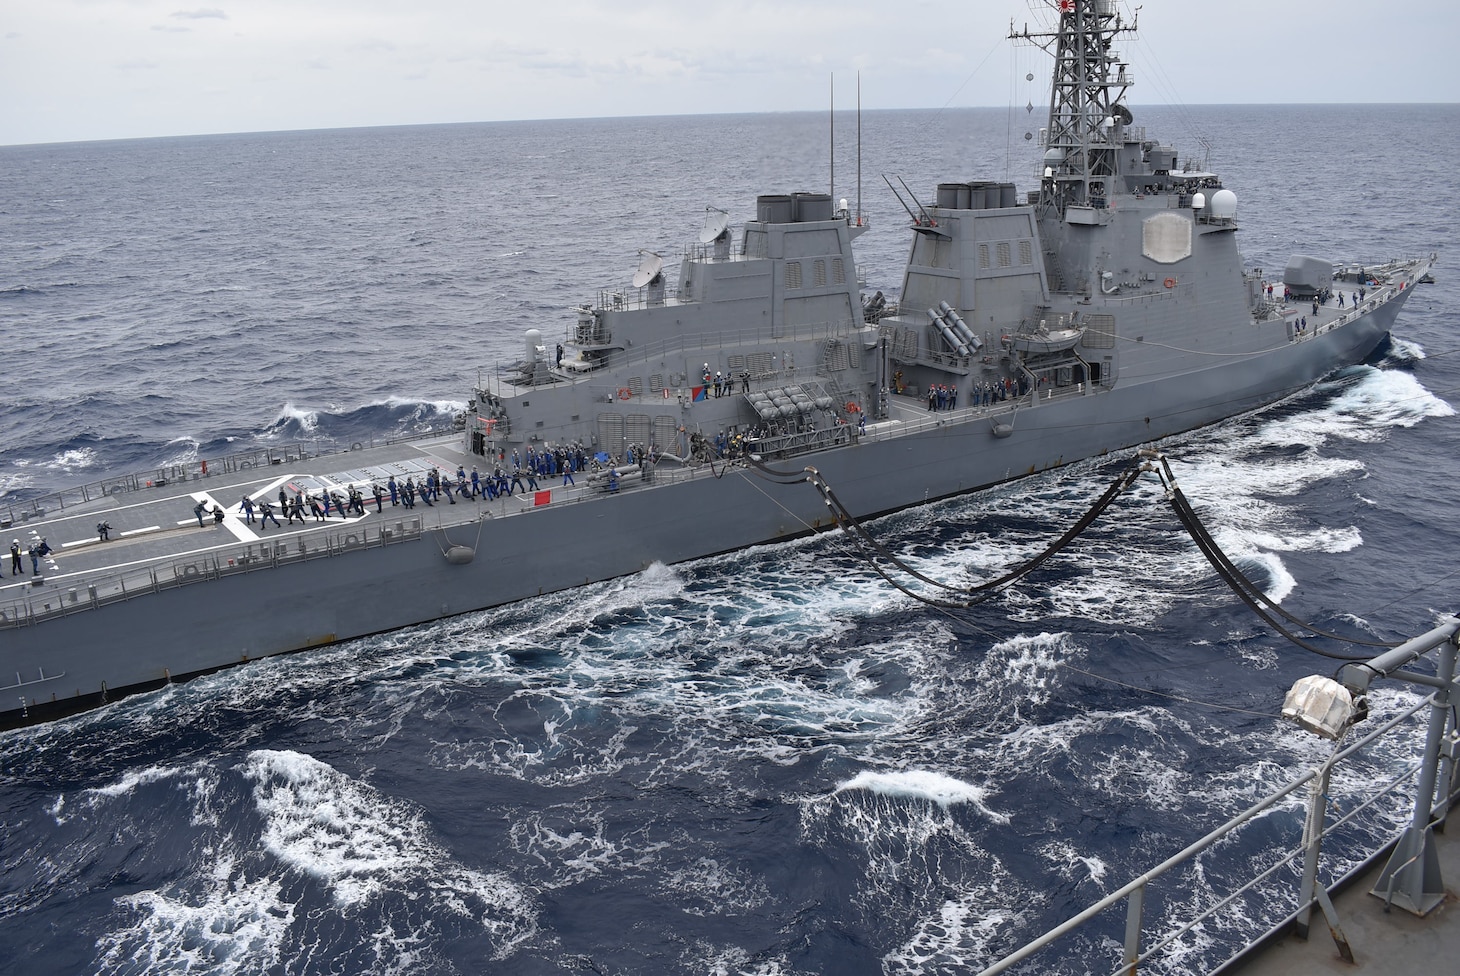 PHILIPPINE SEA (Nov. 27, 2021) -- Henry J. Kaiser-class replenishment oiler USNS Big Horn (T-AO198) conducts underway replenishments in the Philippine Sea with partners and allies, including Anzac-class frigate HMAS Warramunga (FFH 152) of the Royal Australian Navy, as part of Annual Exercise, Nov. 21-30.  Naval forces from Australia, Canada, Germany, Japan and the United States took part in the multilateral, multinational exercise, led by the Japan Maritime Self-Defense Force.  The exercise helps strengthen enduring relationships while sharpening naval proficiencies. (Photo by Juahn Gaskins)